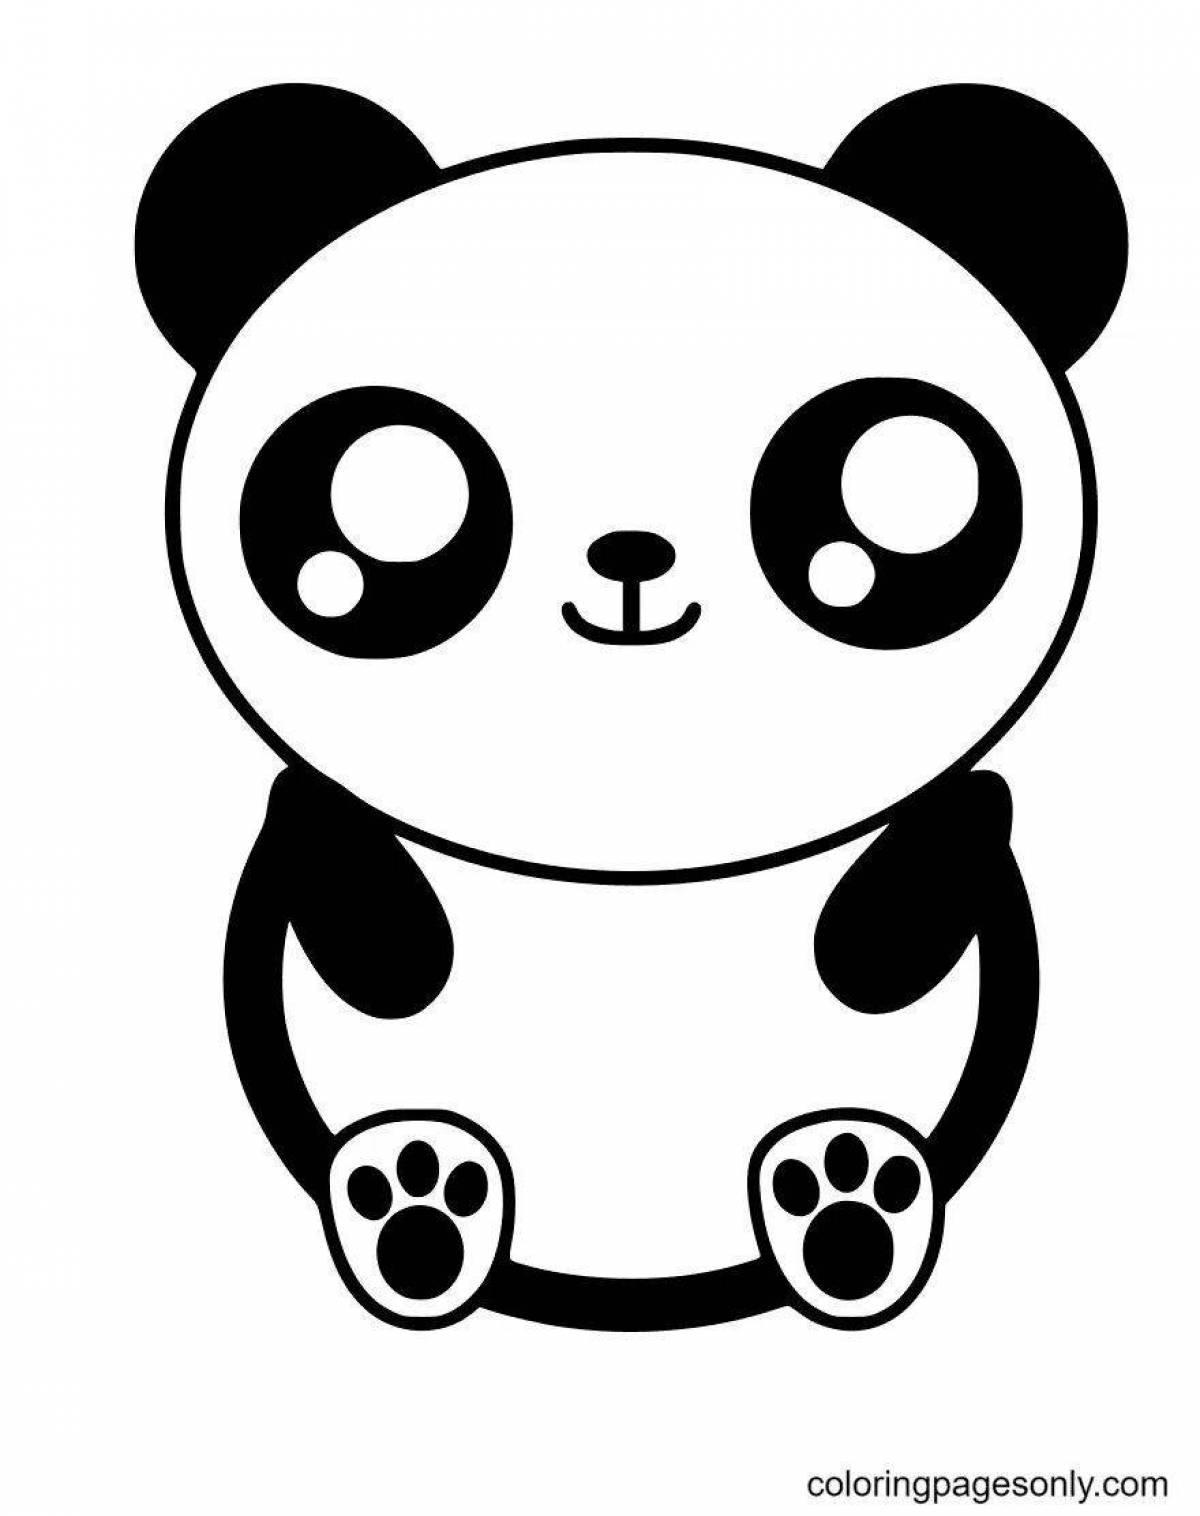 Dazzling panda coloring pages for girls